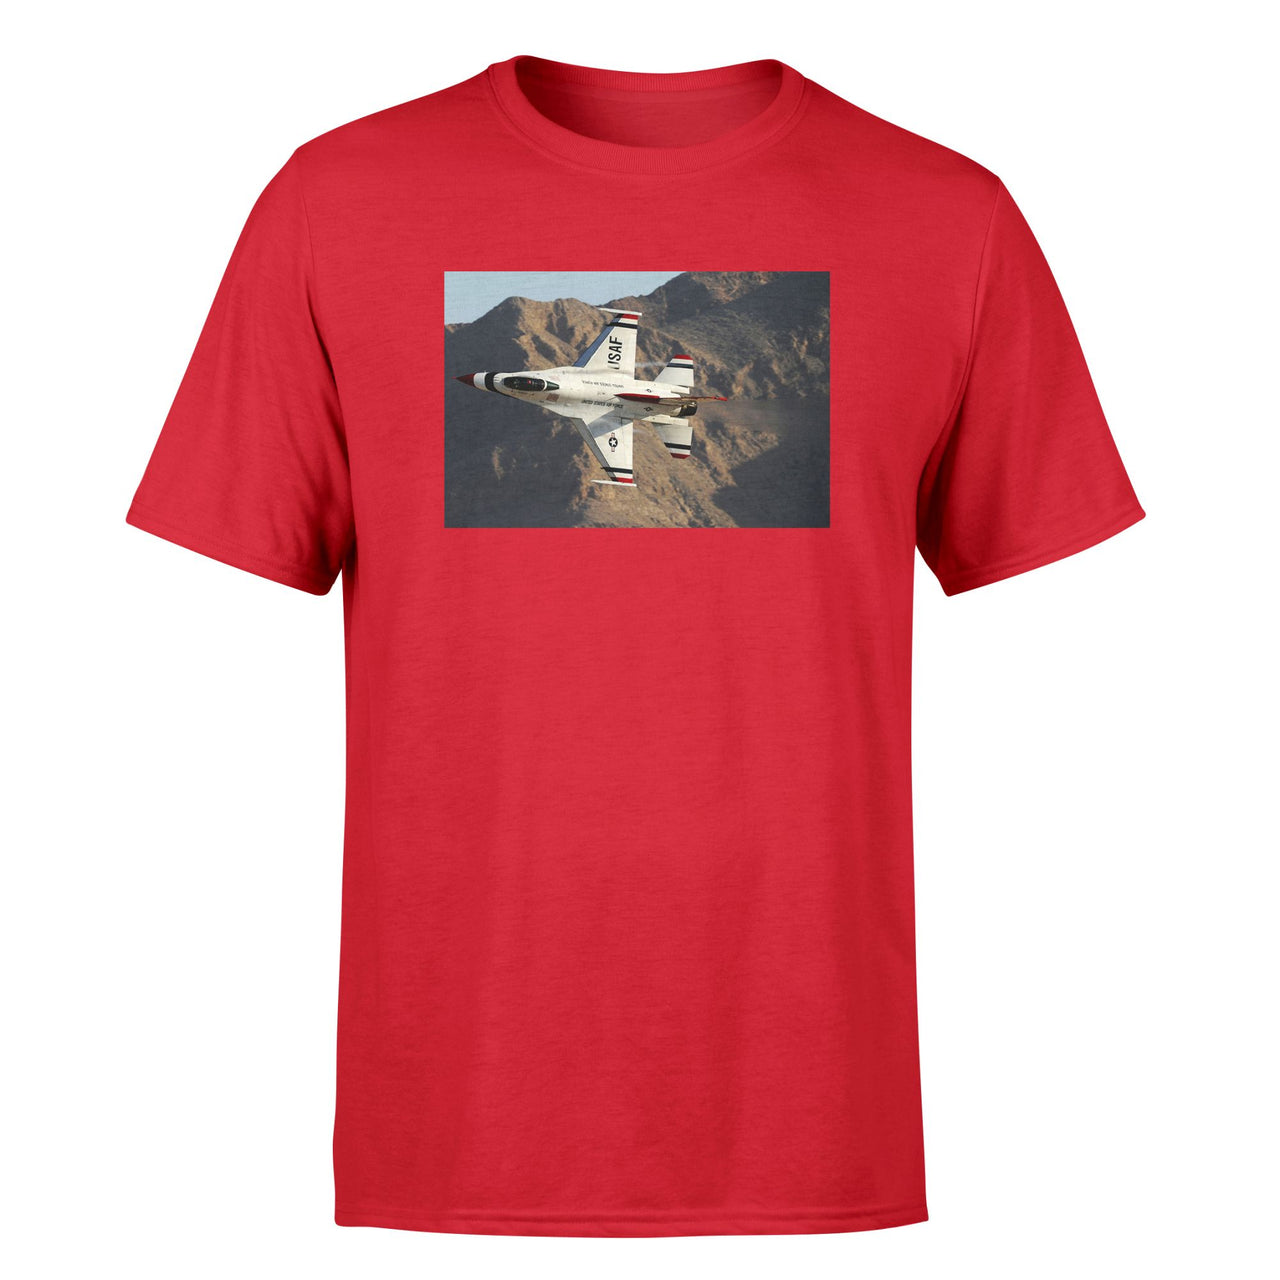 Amazing Show by Fighting Falcon F16 Designed T-Shirts